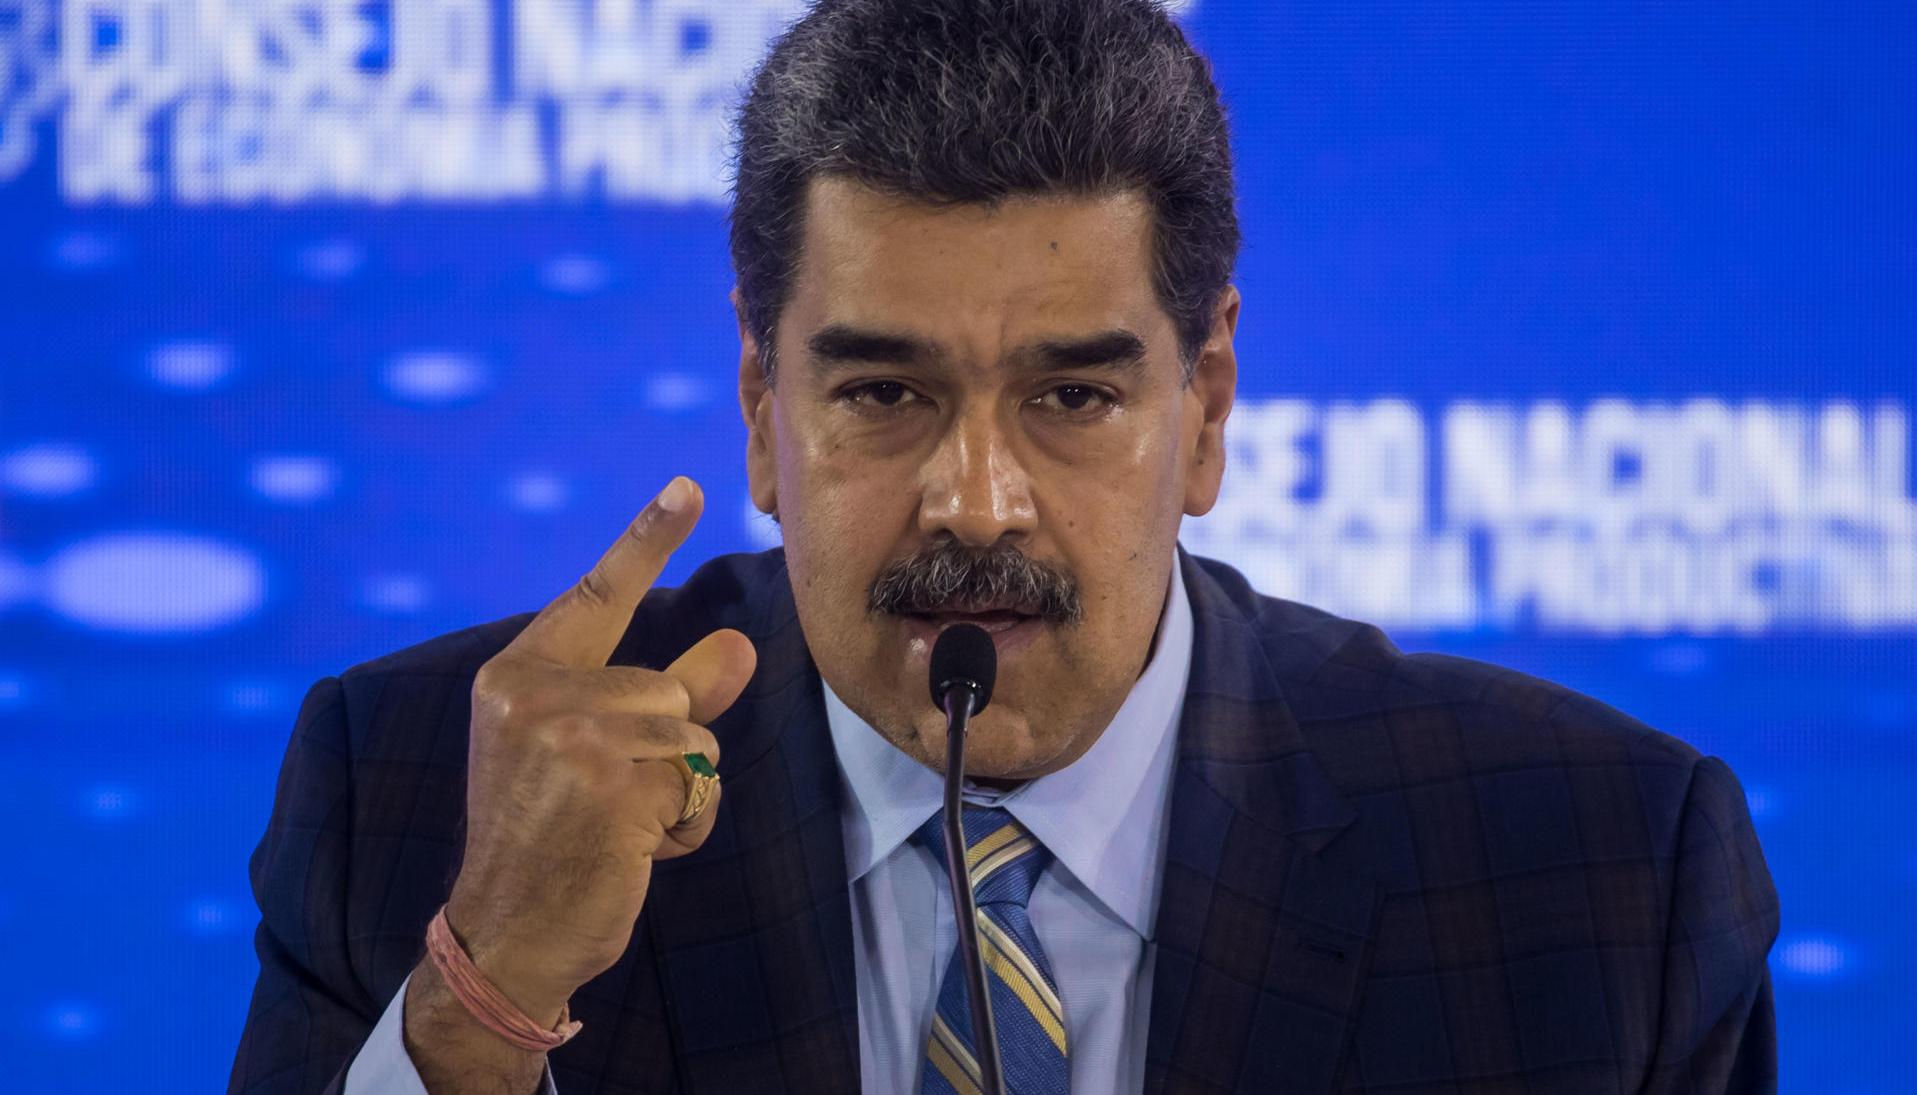 Maduro asks his Guyanese counterpart to avoid the “escalation of a conflict” in the disputed area